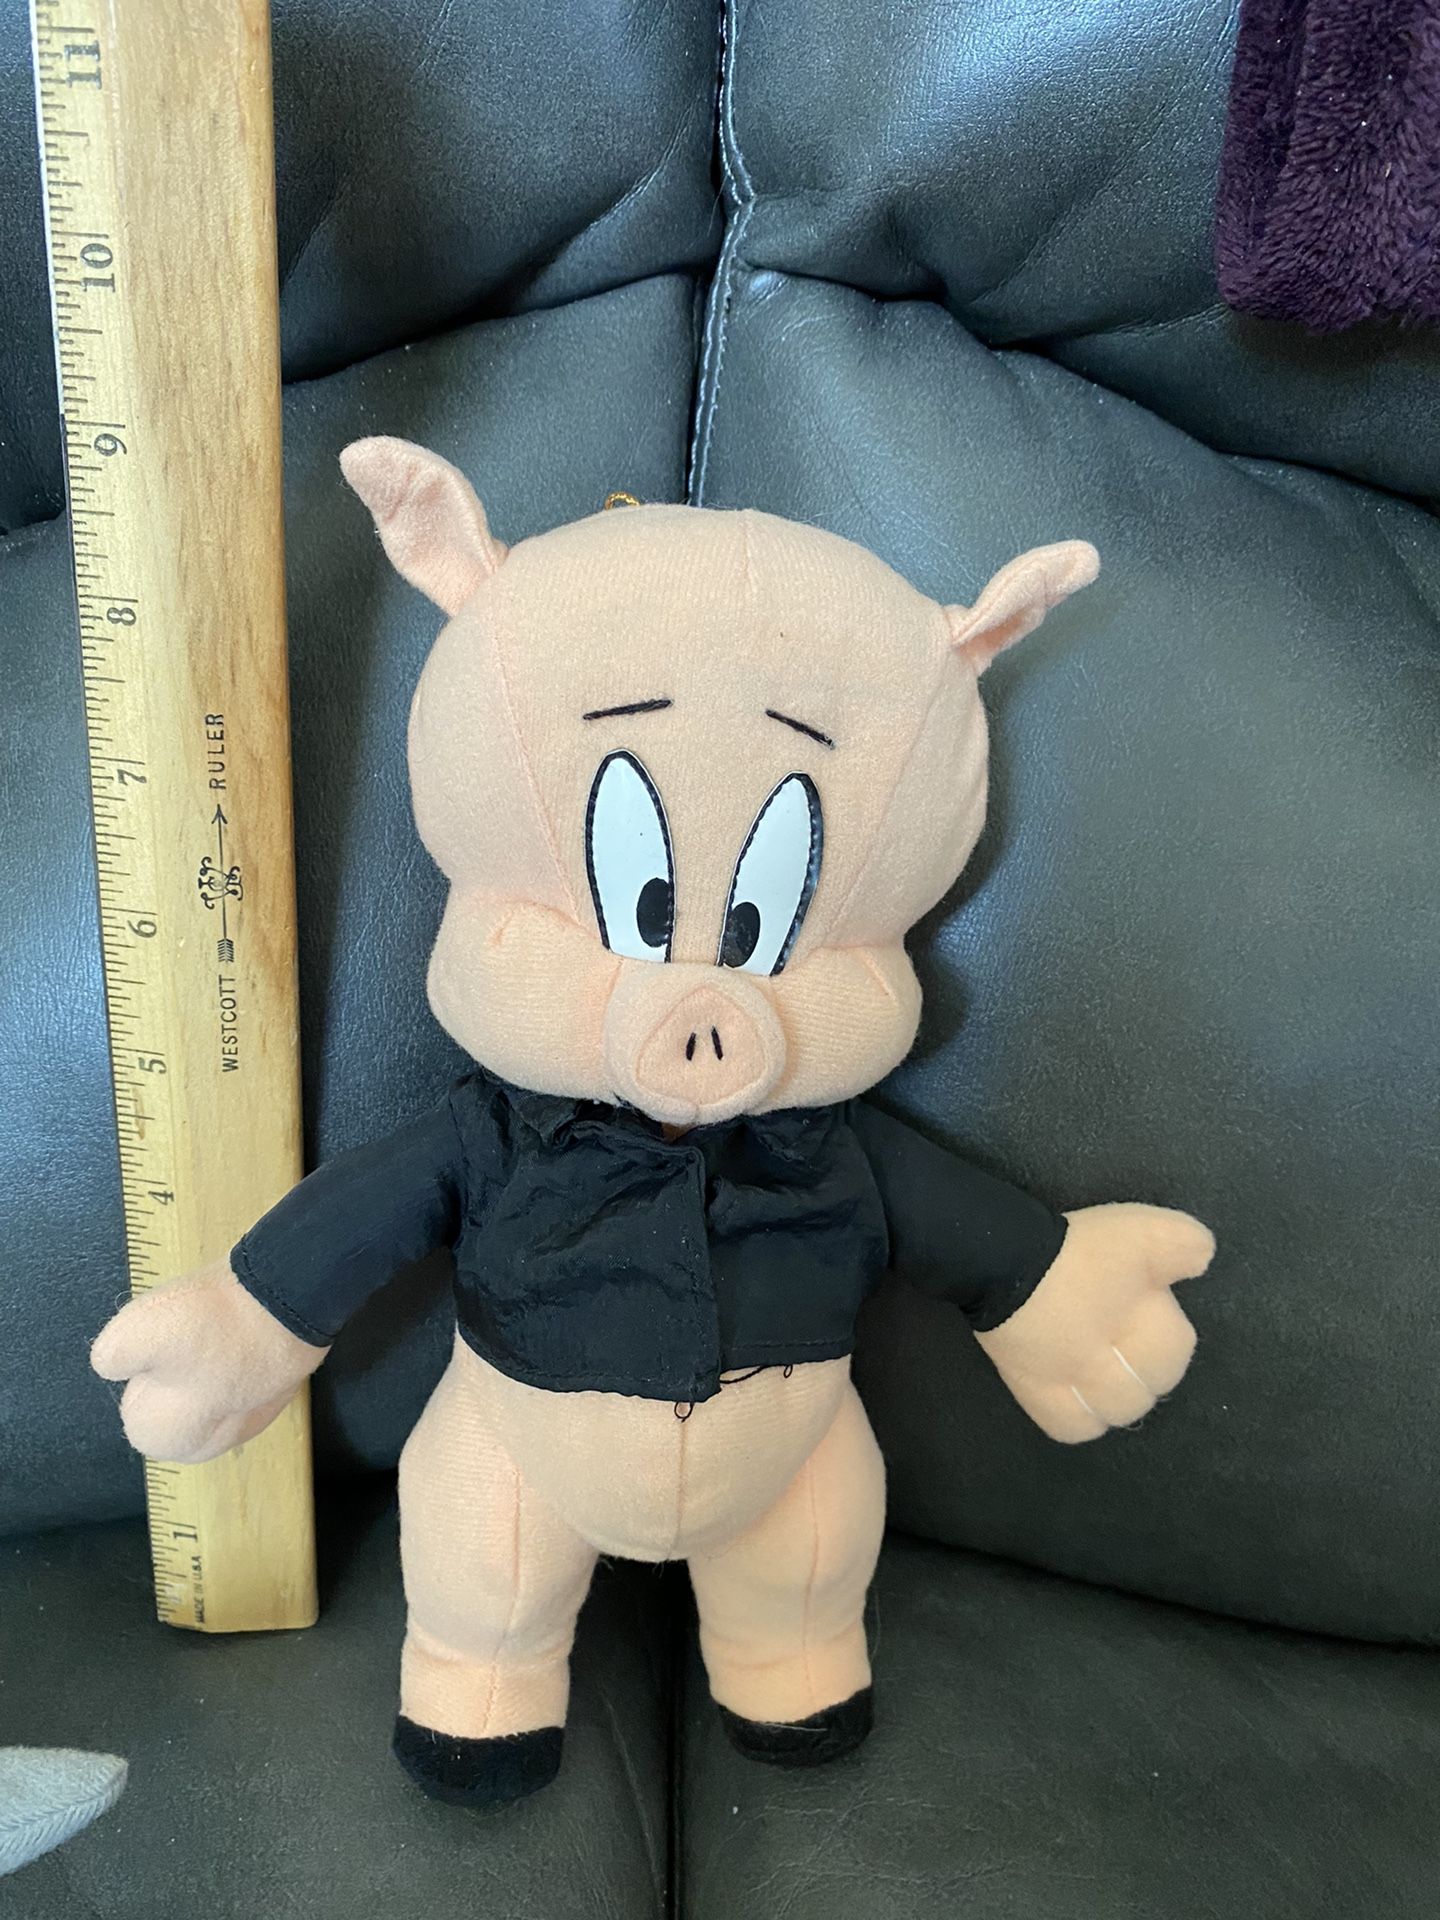 Looney Tunes Vintage Porky Pig Stuffed Toy Item Still For Sale